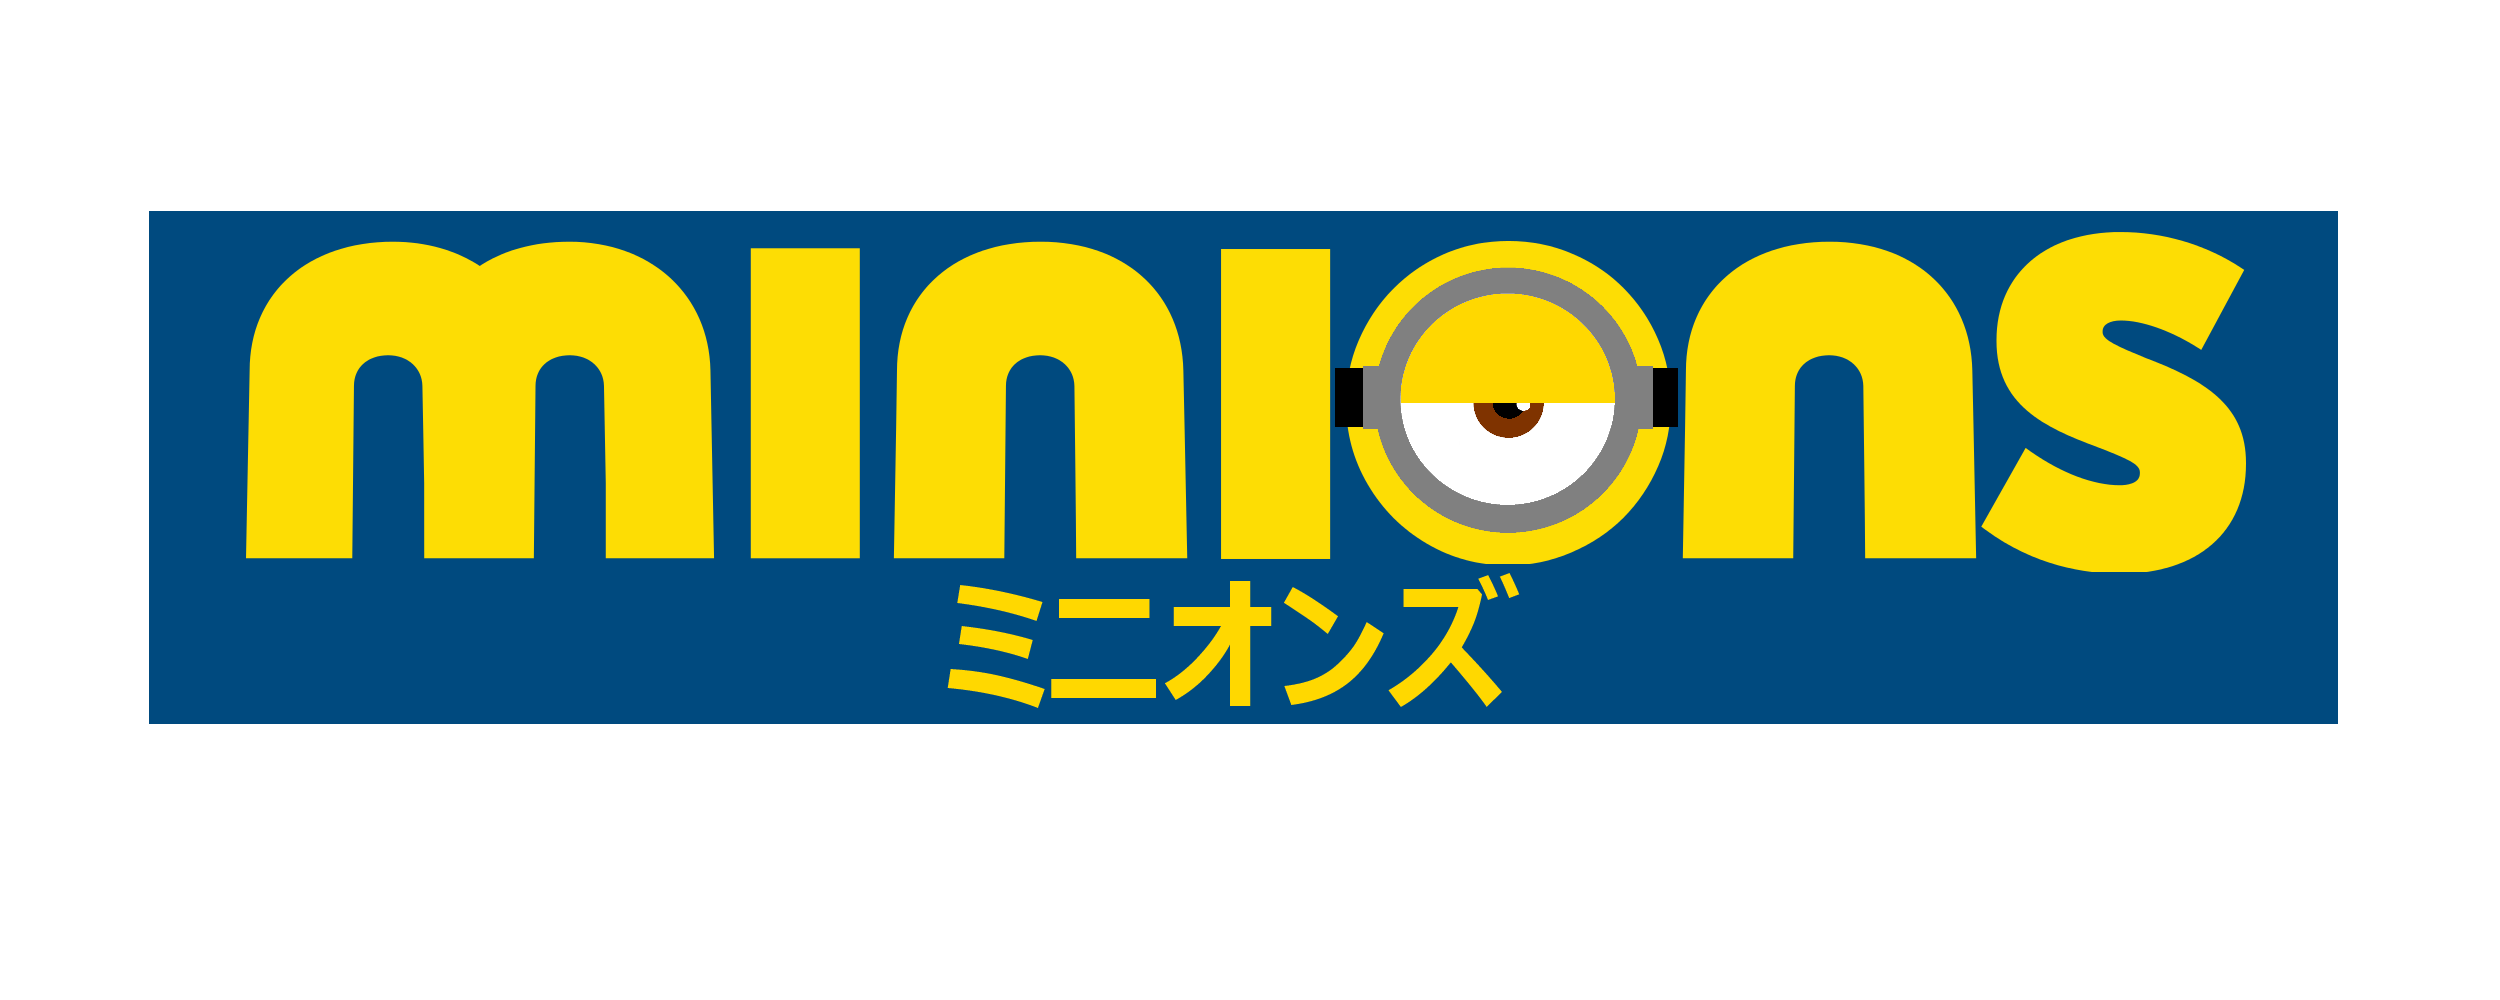 Download PNG image - Minions Logo PNG Image 